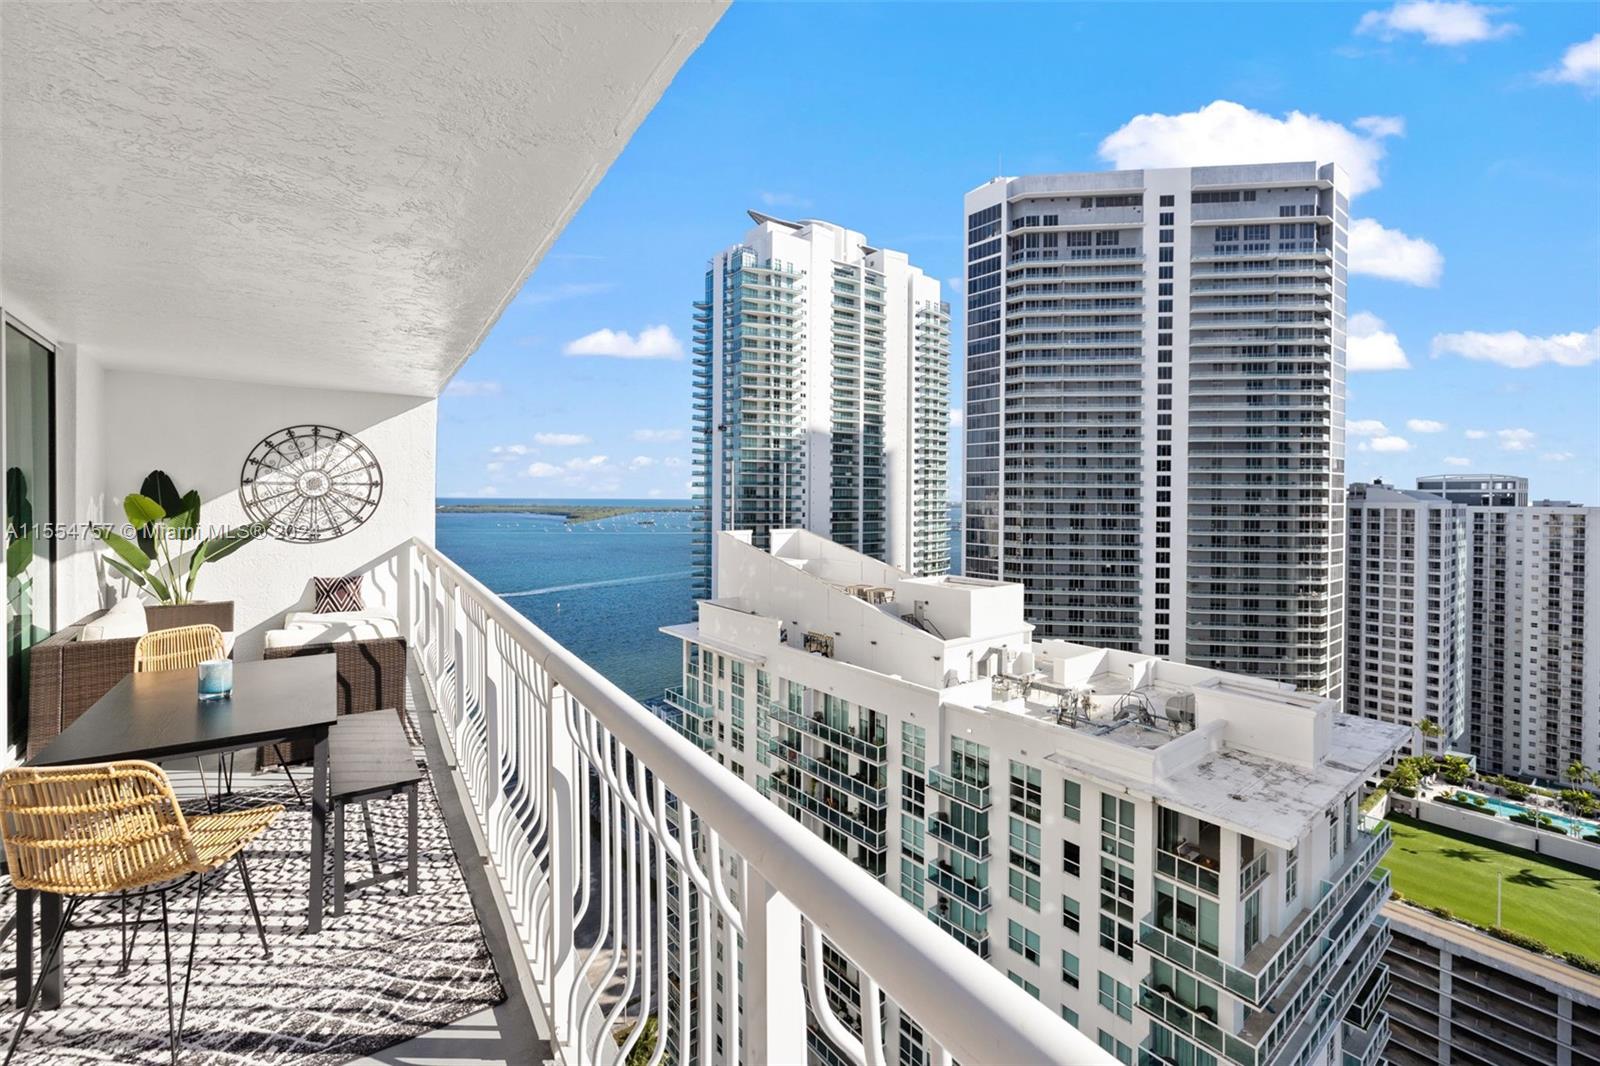 Absolutely stunning high-floor fully furnished and beautifully remodeled dream condo in the heart of Brickell. Everything is included and no detail was overlooked in curating this exceptional Airbnb approved unit. Rent it out daily, weekly, monthly or annually for complete flexibility. The residence boasts beautiful Bay views, an open kitchen, large closet and comfortable living and dining spaces in addition to a large 27 foot furnished balcony. The building has recently renovated work from home spaces, club room, gym and resort style pool and a low HOA! The unit is walking distance from Brickell City Centre and Mary Brickell Village as well as nightlife, restaurants and the picturesque island of Brickell Key. Nothing is missing in this luxurious home away from home.